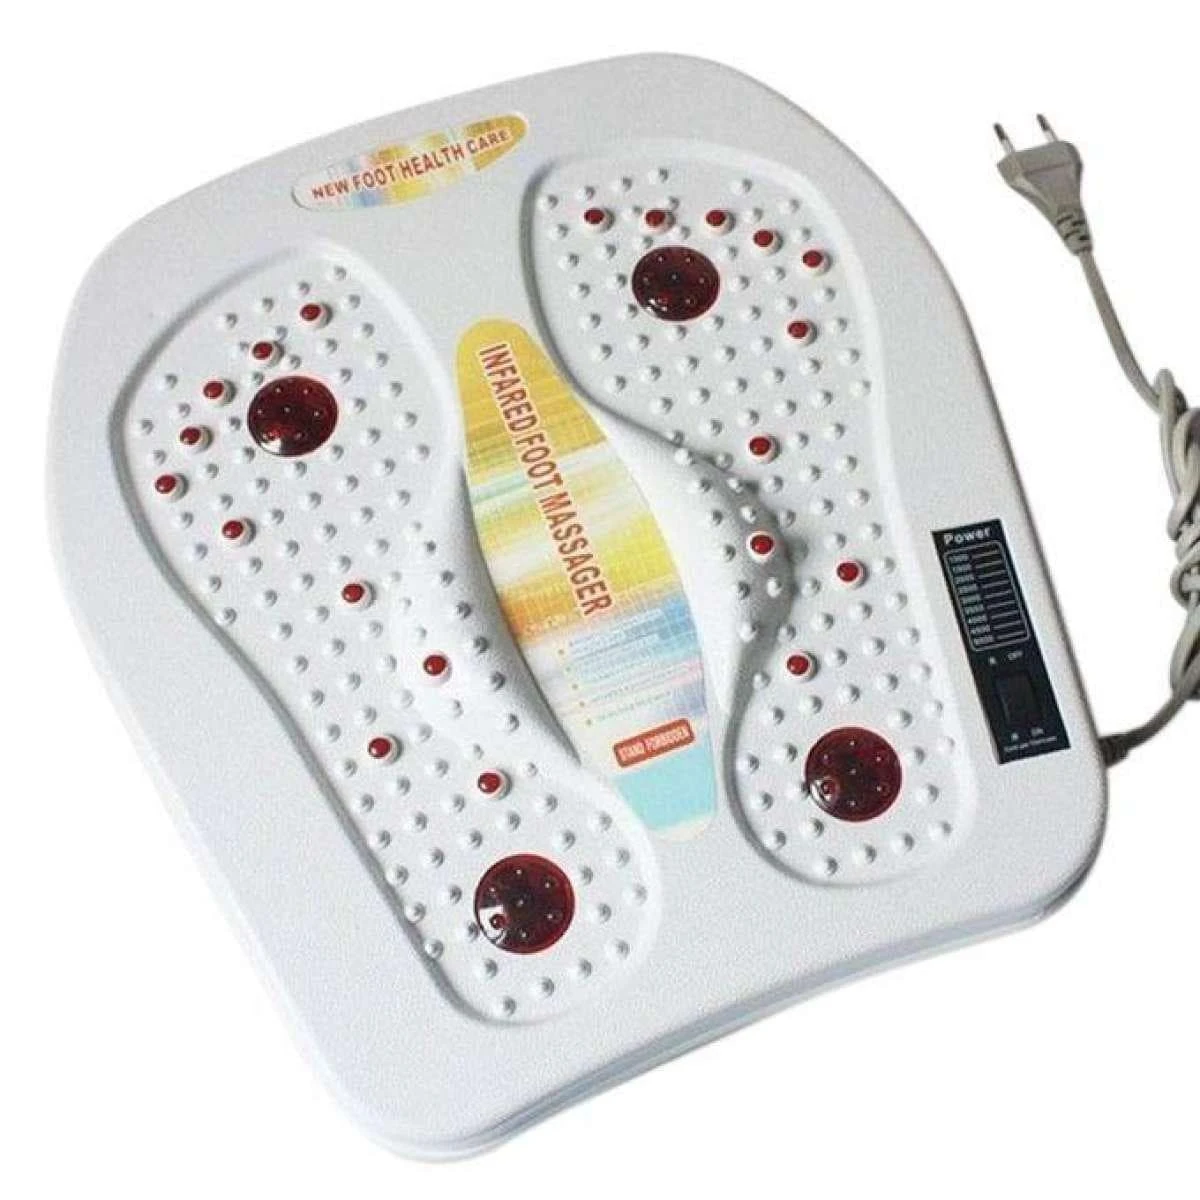 Foot Massager Vibrating Massage Blood Circulation Pain Relief Pedicure Machine Electric